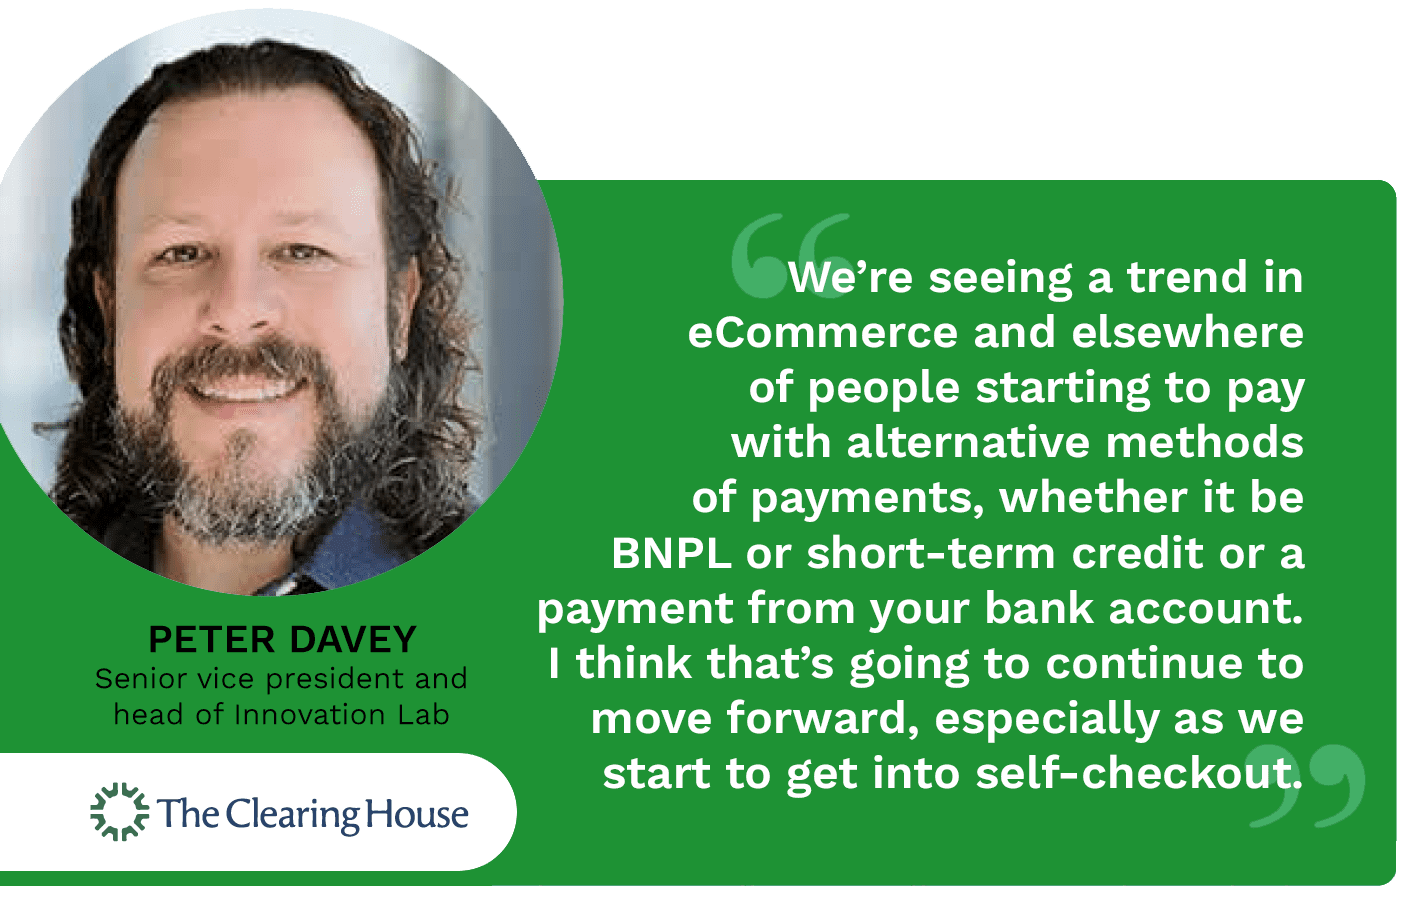 Peter Davey, senior vice president and head of the Innovation Lab at The Clearing House, discusses the pros and cons of various faster payment systems.